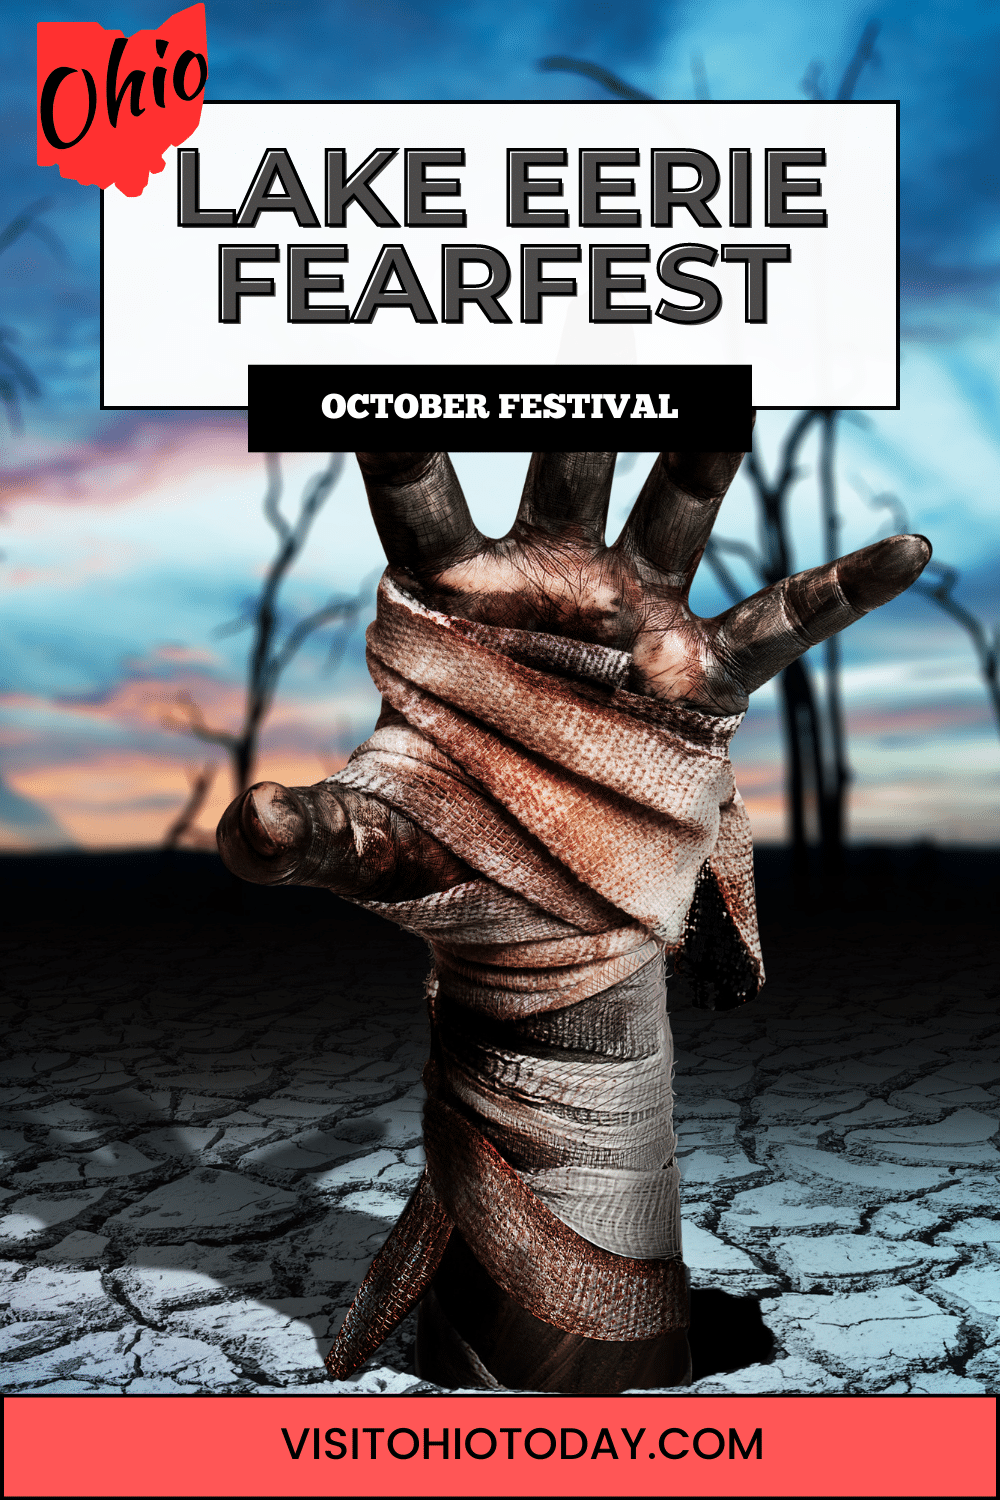 The Lake Eerie Fearfest is held at the Ghostly Manor Thrill Center in Sandusky. Open each weekend throughout October, evenings only. Be prepared to be scared!